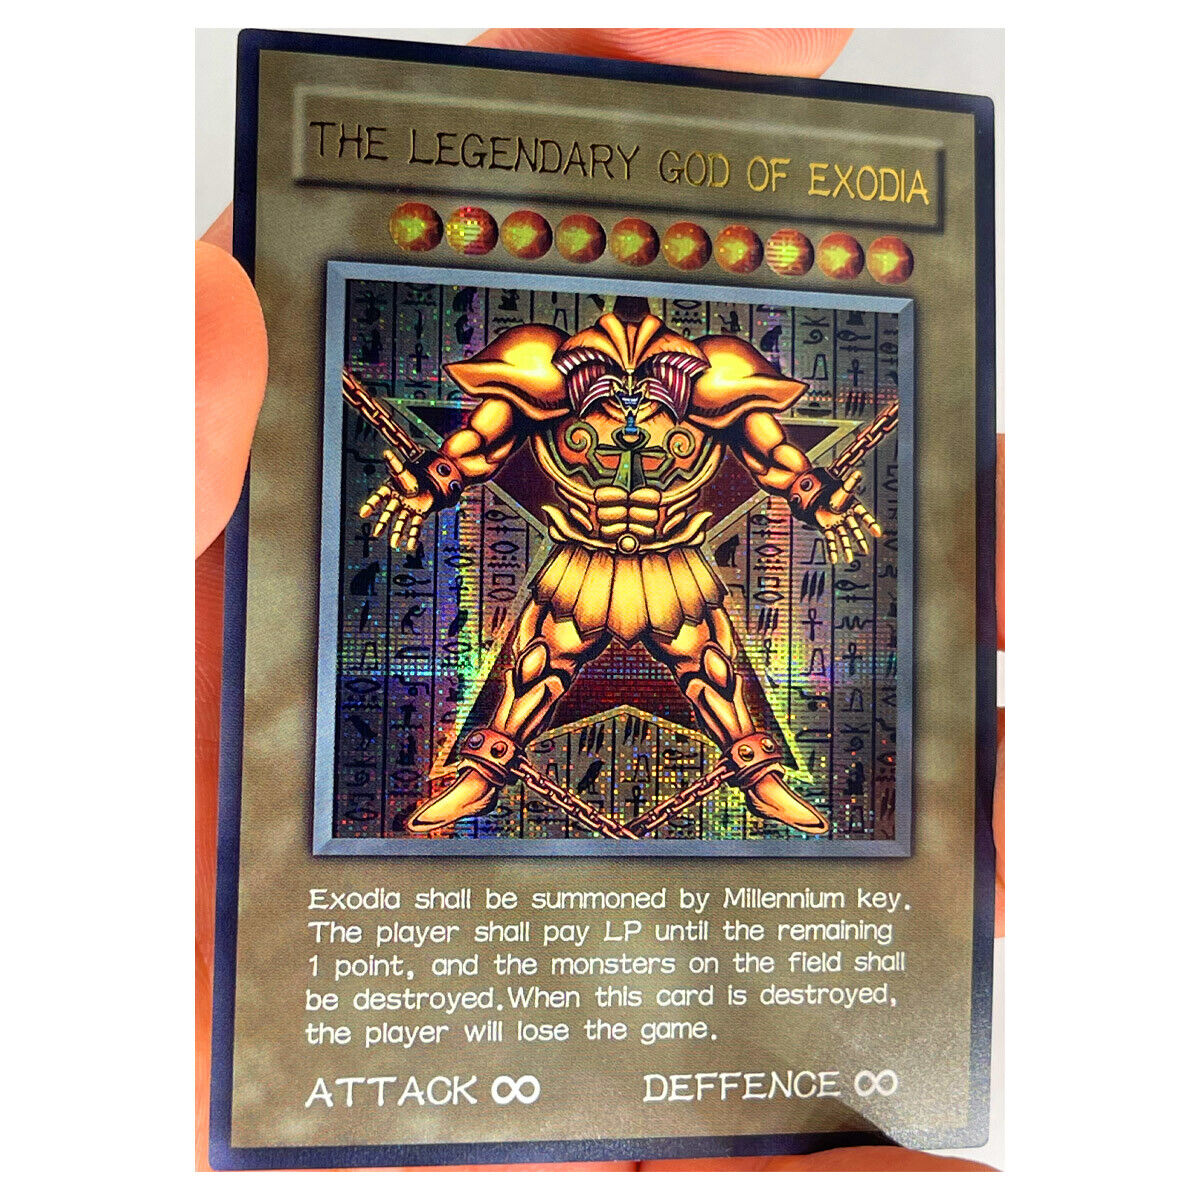 clyde faulkner recommends pictures of yu gi oh card pic